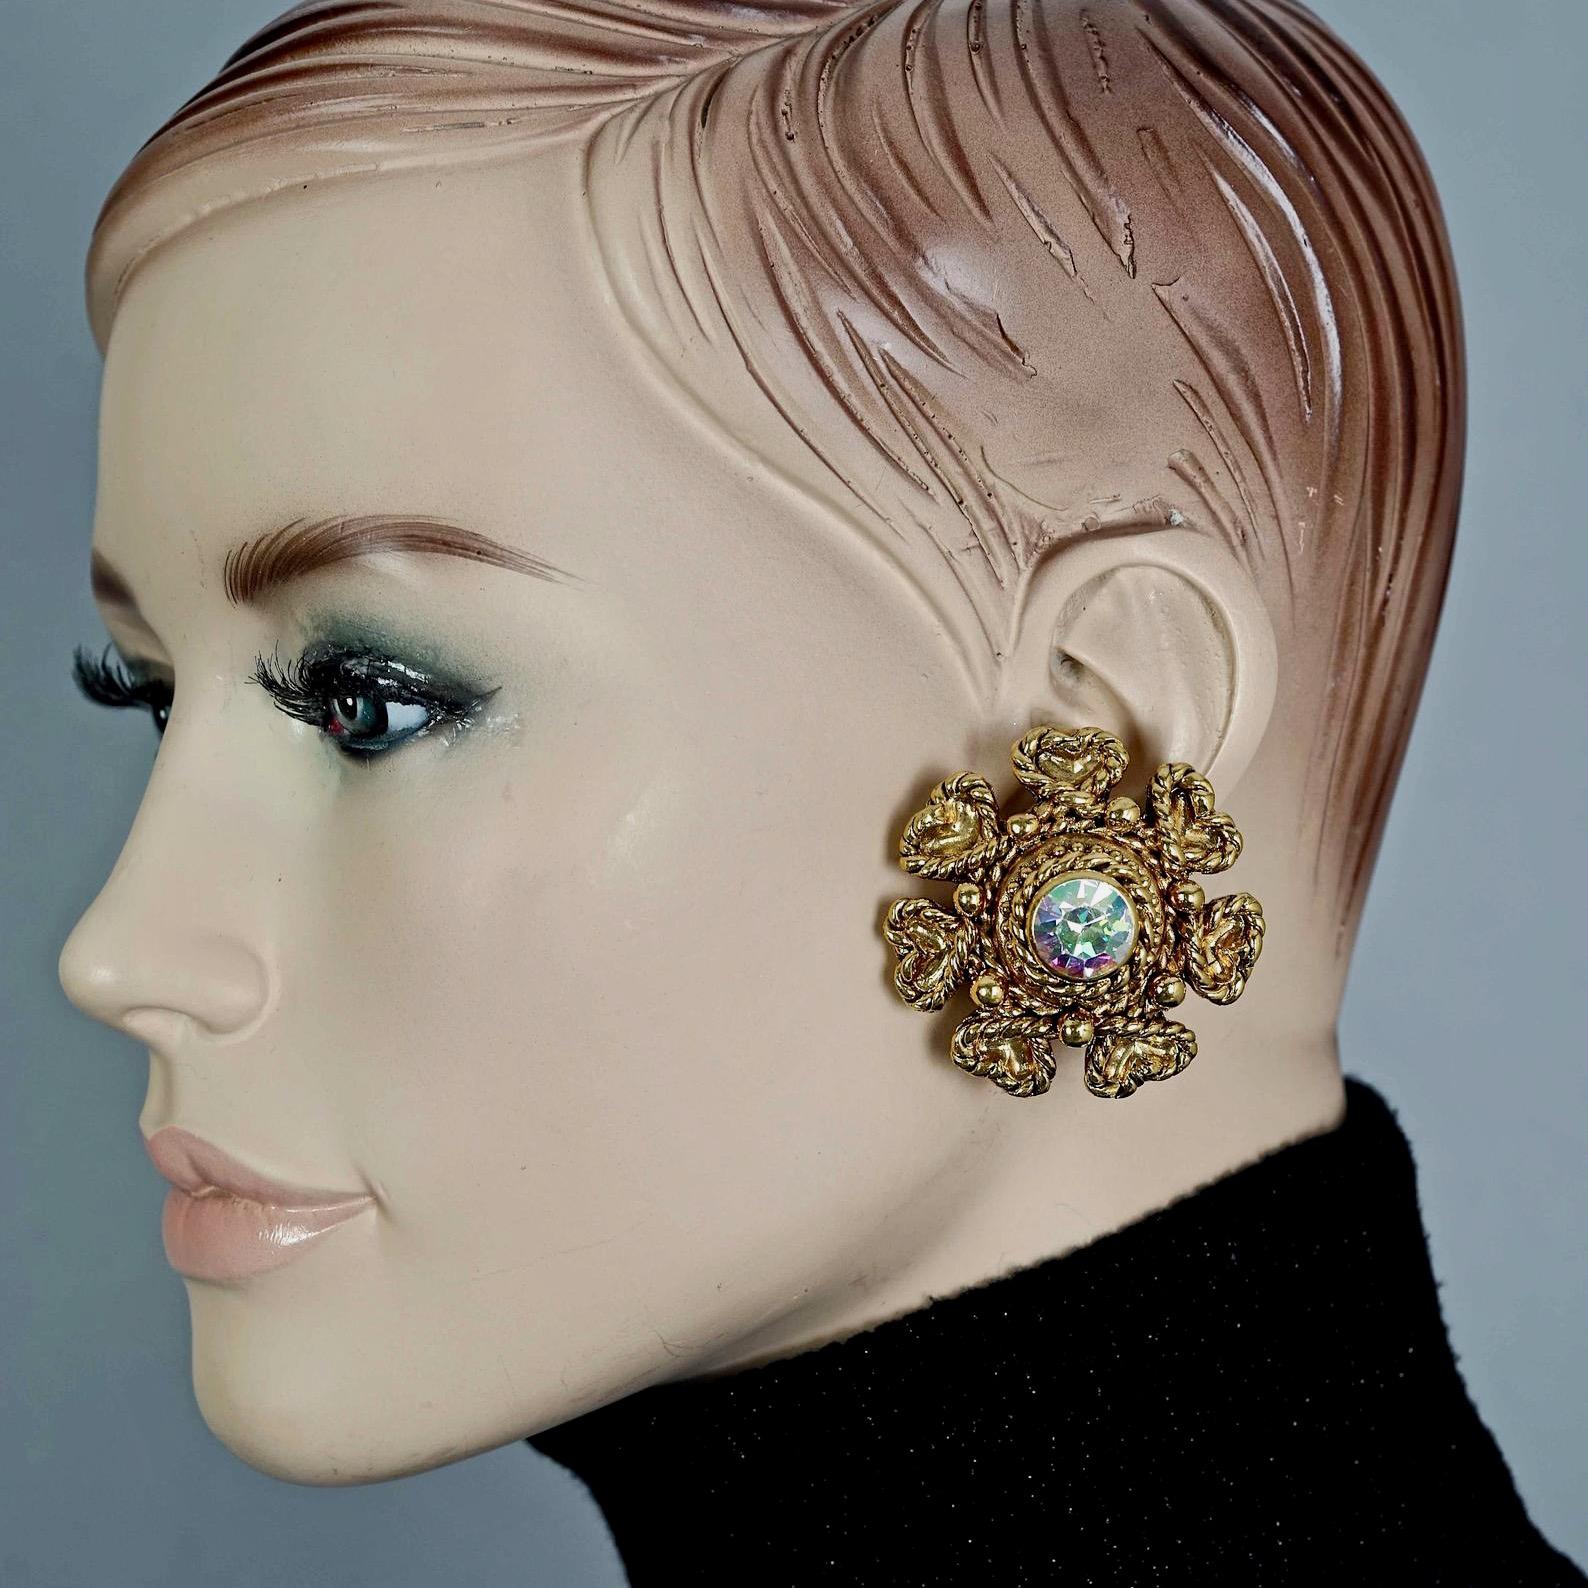 Vintage Massive CLAIRE DEVE Flower Rhinestone Earrings

Measurements:
Height: 1.77 inches (4.5 cm)
Width: 1.77 inches (4.5 cm)
Depth: 0.71 inch (1.8 cm)
Weight per Earring: 16 grams

Features:
- 100% Authentic CLAIRE DEVE.
- Massive intricate flower